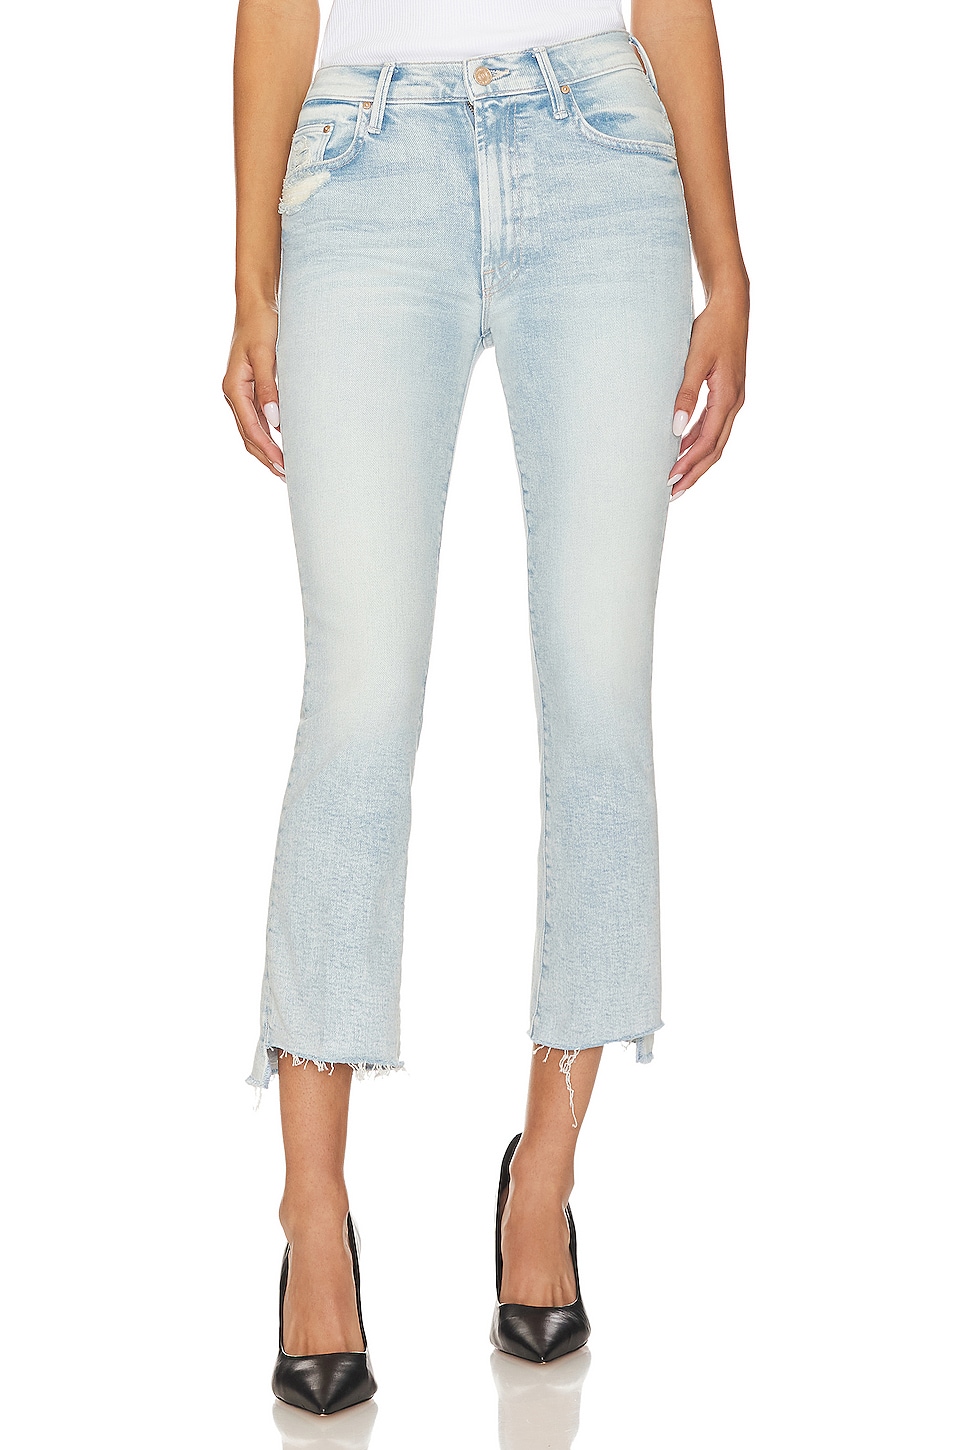 MOTHER The Insider Crop Step Fray in Smooth Sailing | REVOLVE